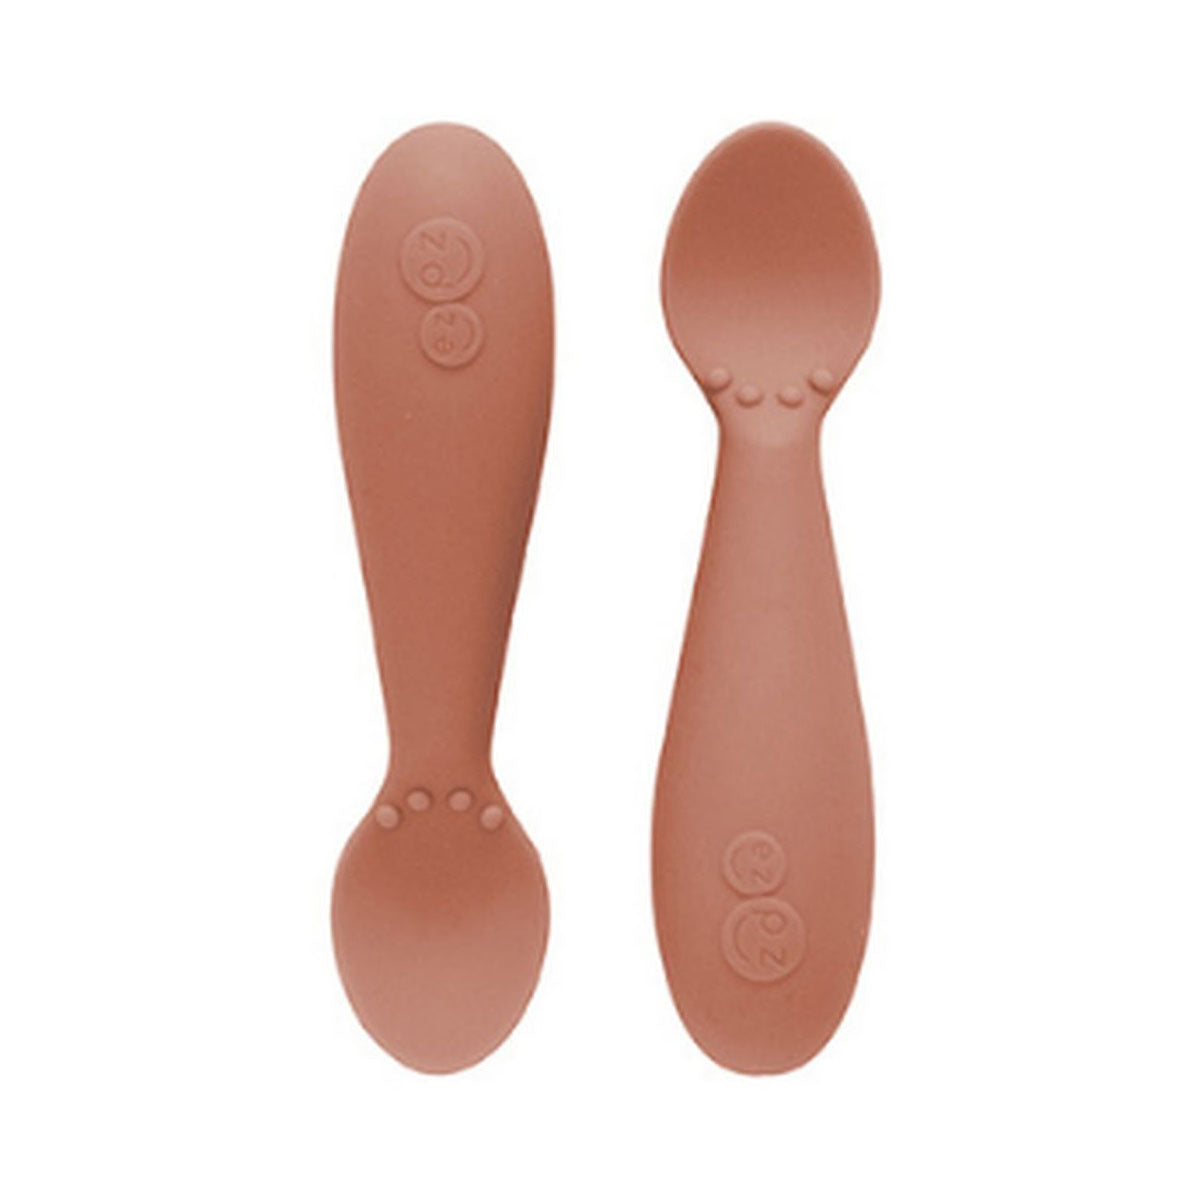 Pack of 2 EzPz 100% silicone baby spoons for baby led weaning, Sensory bumps on the spoon bowl activate sensory awareness and the short, coarse and rounded handle ensures a non-slip grip.